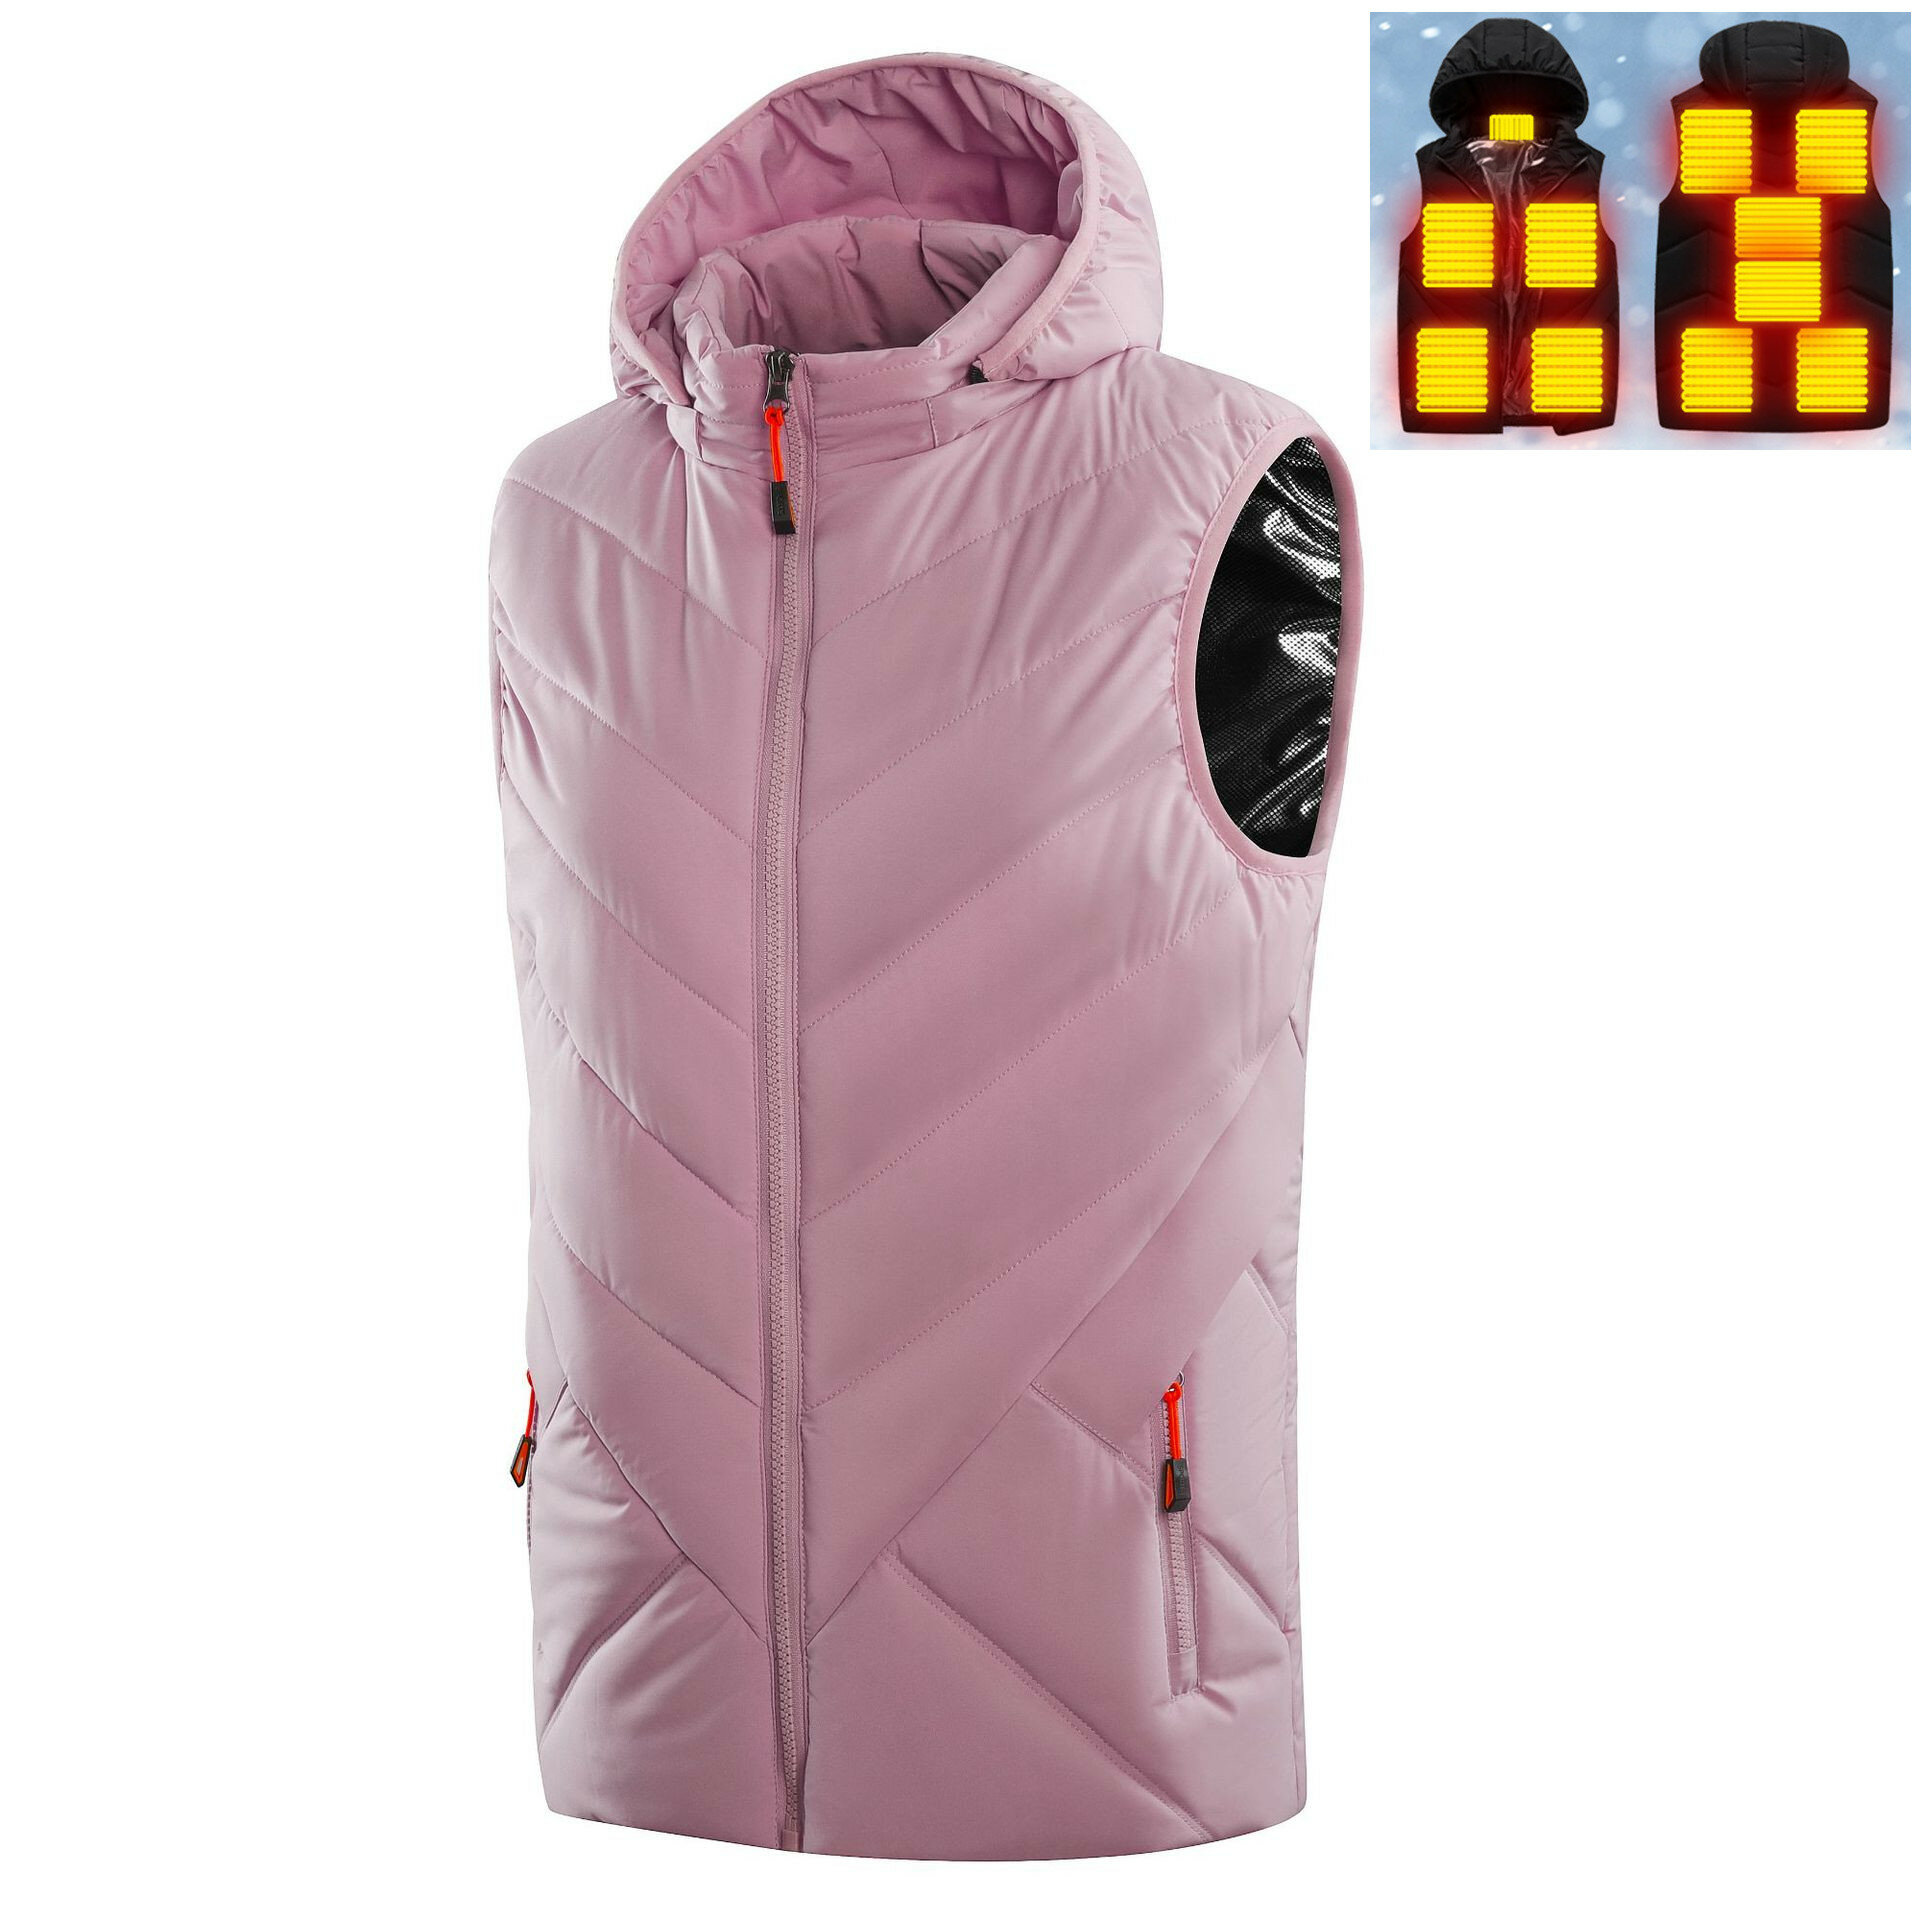 11 Areas Heated Vest Women Outdoor USB Heating Vest With Hat Washable Heated Jackets Sleeveless Cotton Coat Clothing Pink